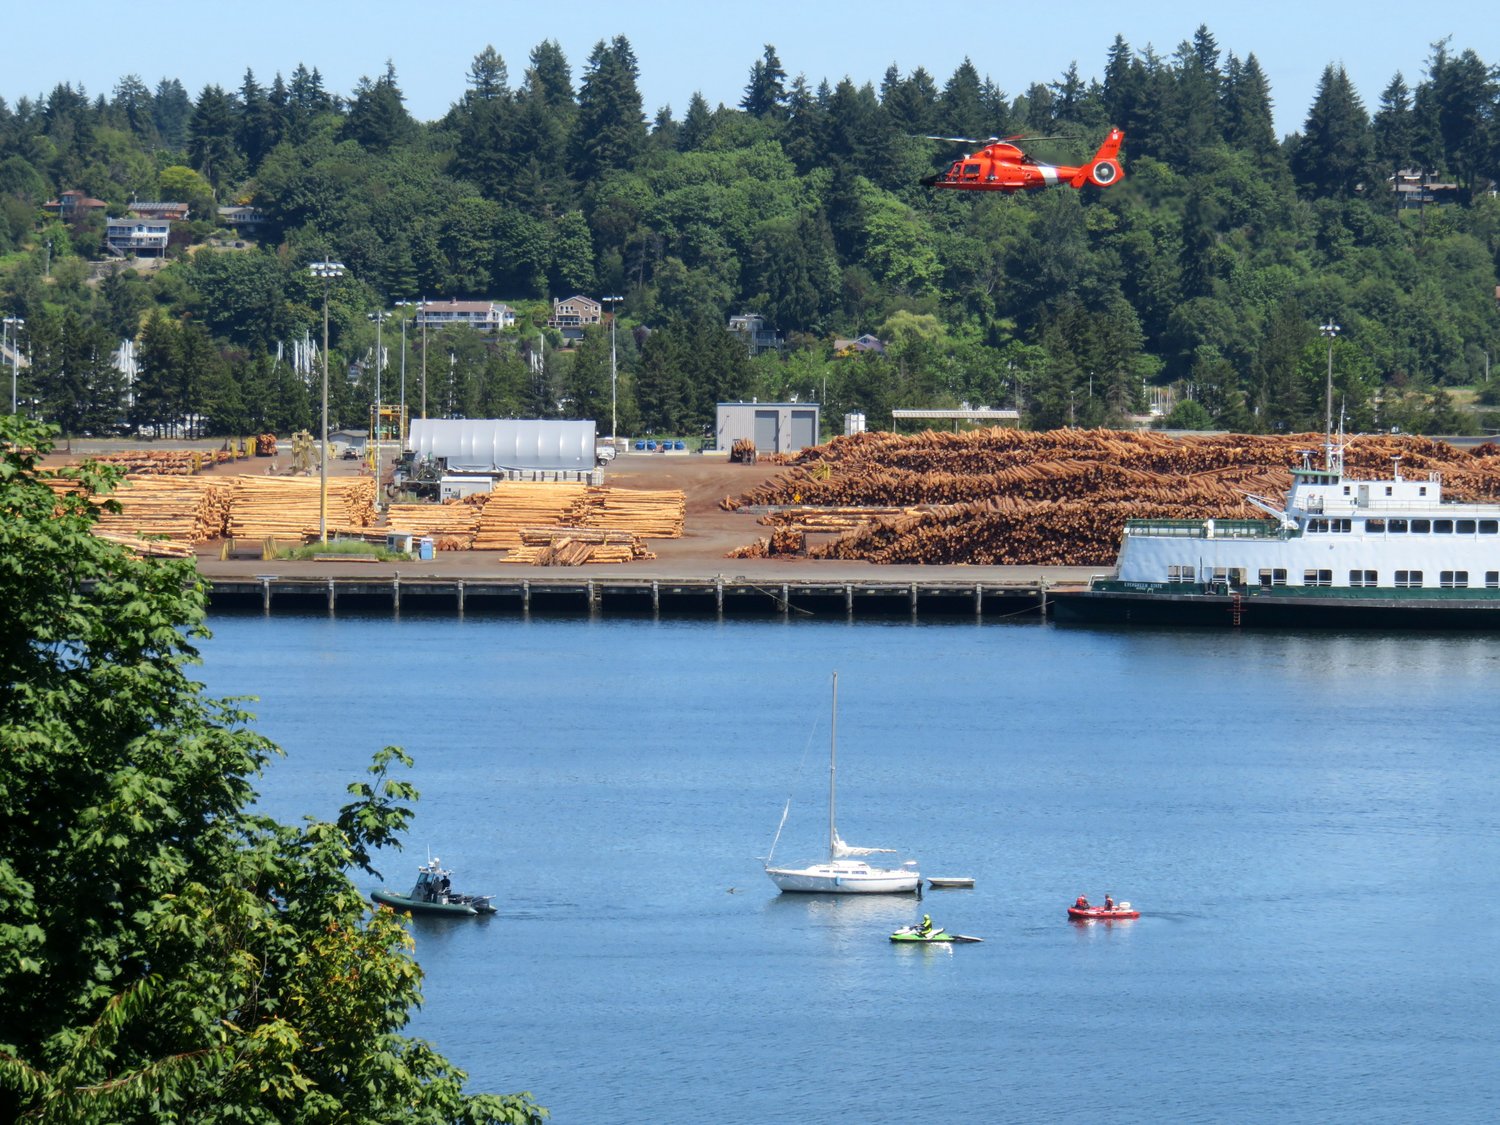 Life vests save lives: The U.S. Coast Guard deployed a chopper to assist in the recovery of a man who had jumped off a boat near the port of Olympia. His body was eventually recovered on Sun., July 18, 2021.